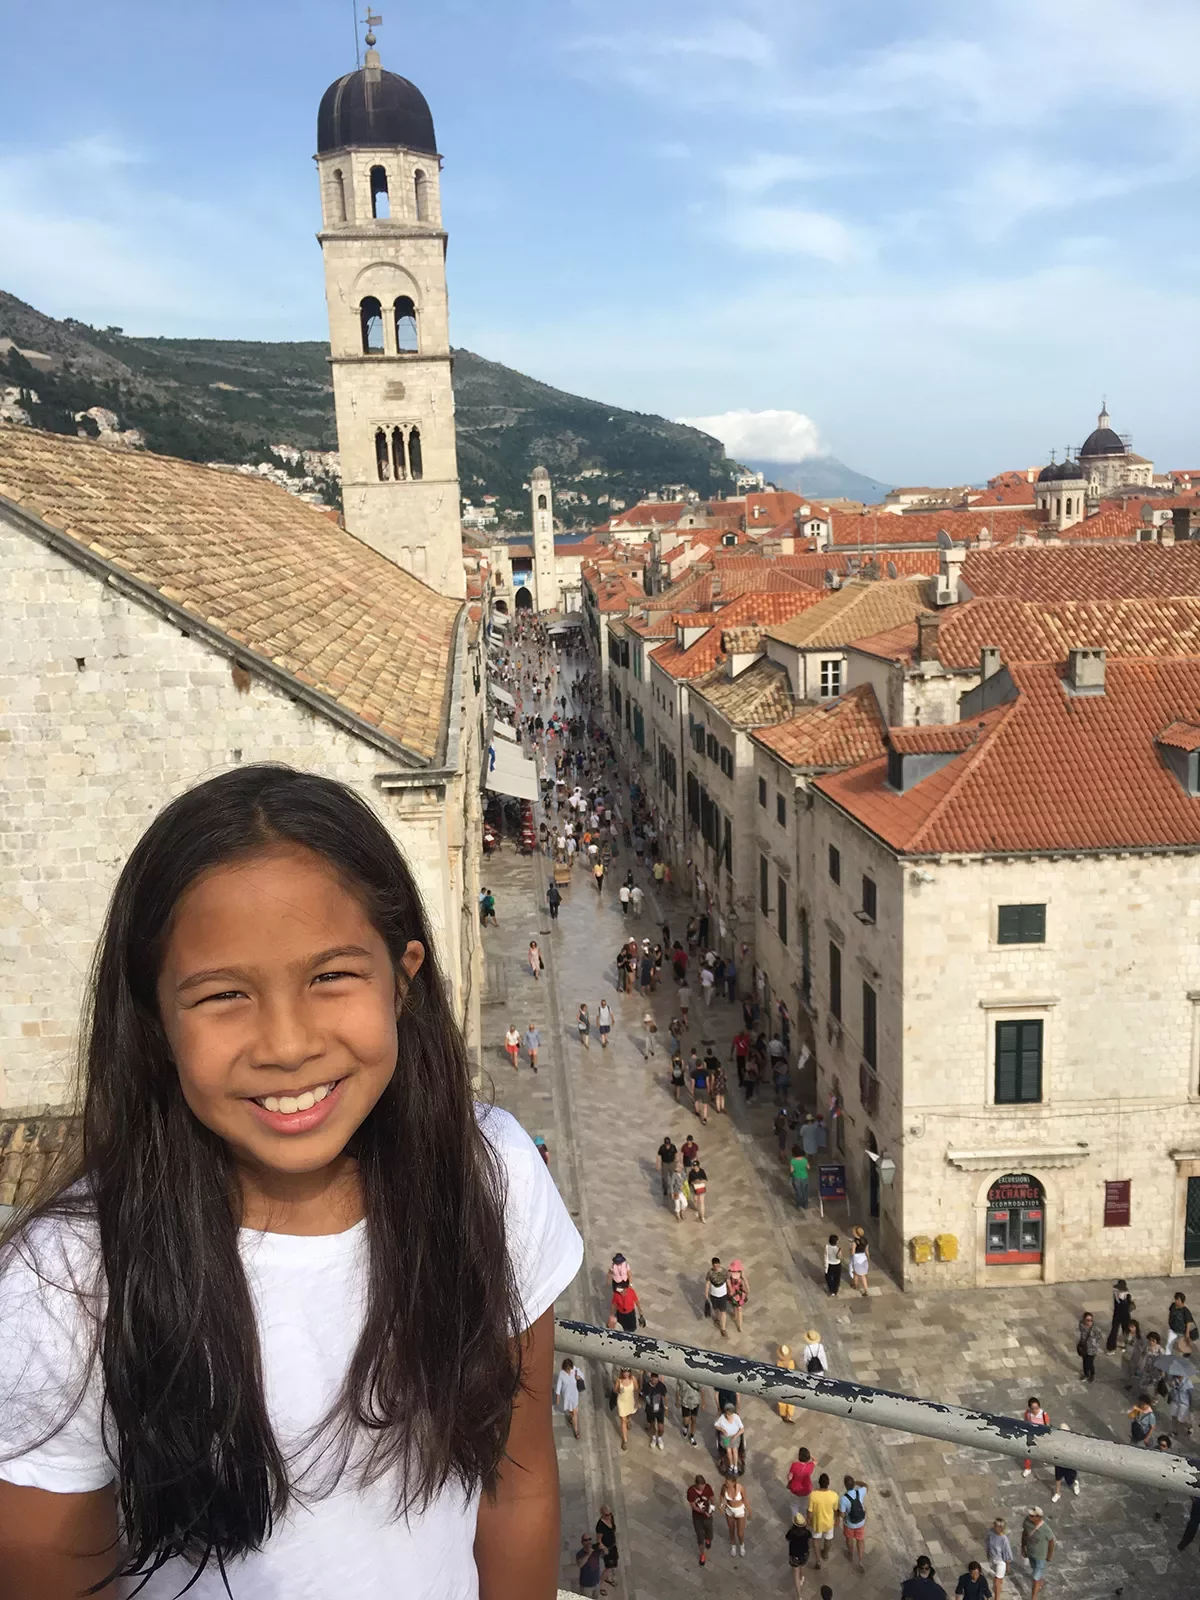 Young guest on balcony, smiling, overlooking crowded Dubrovnik street.